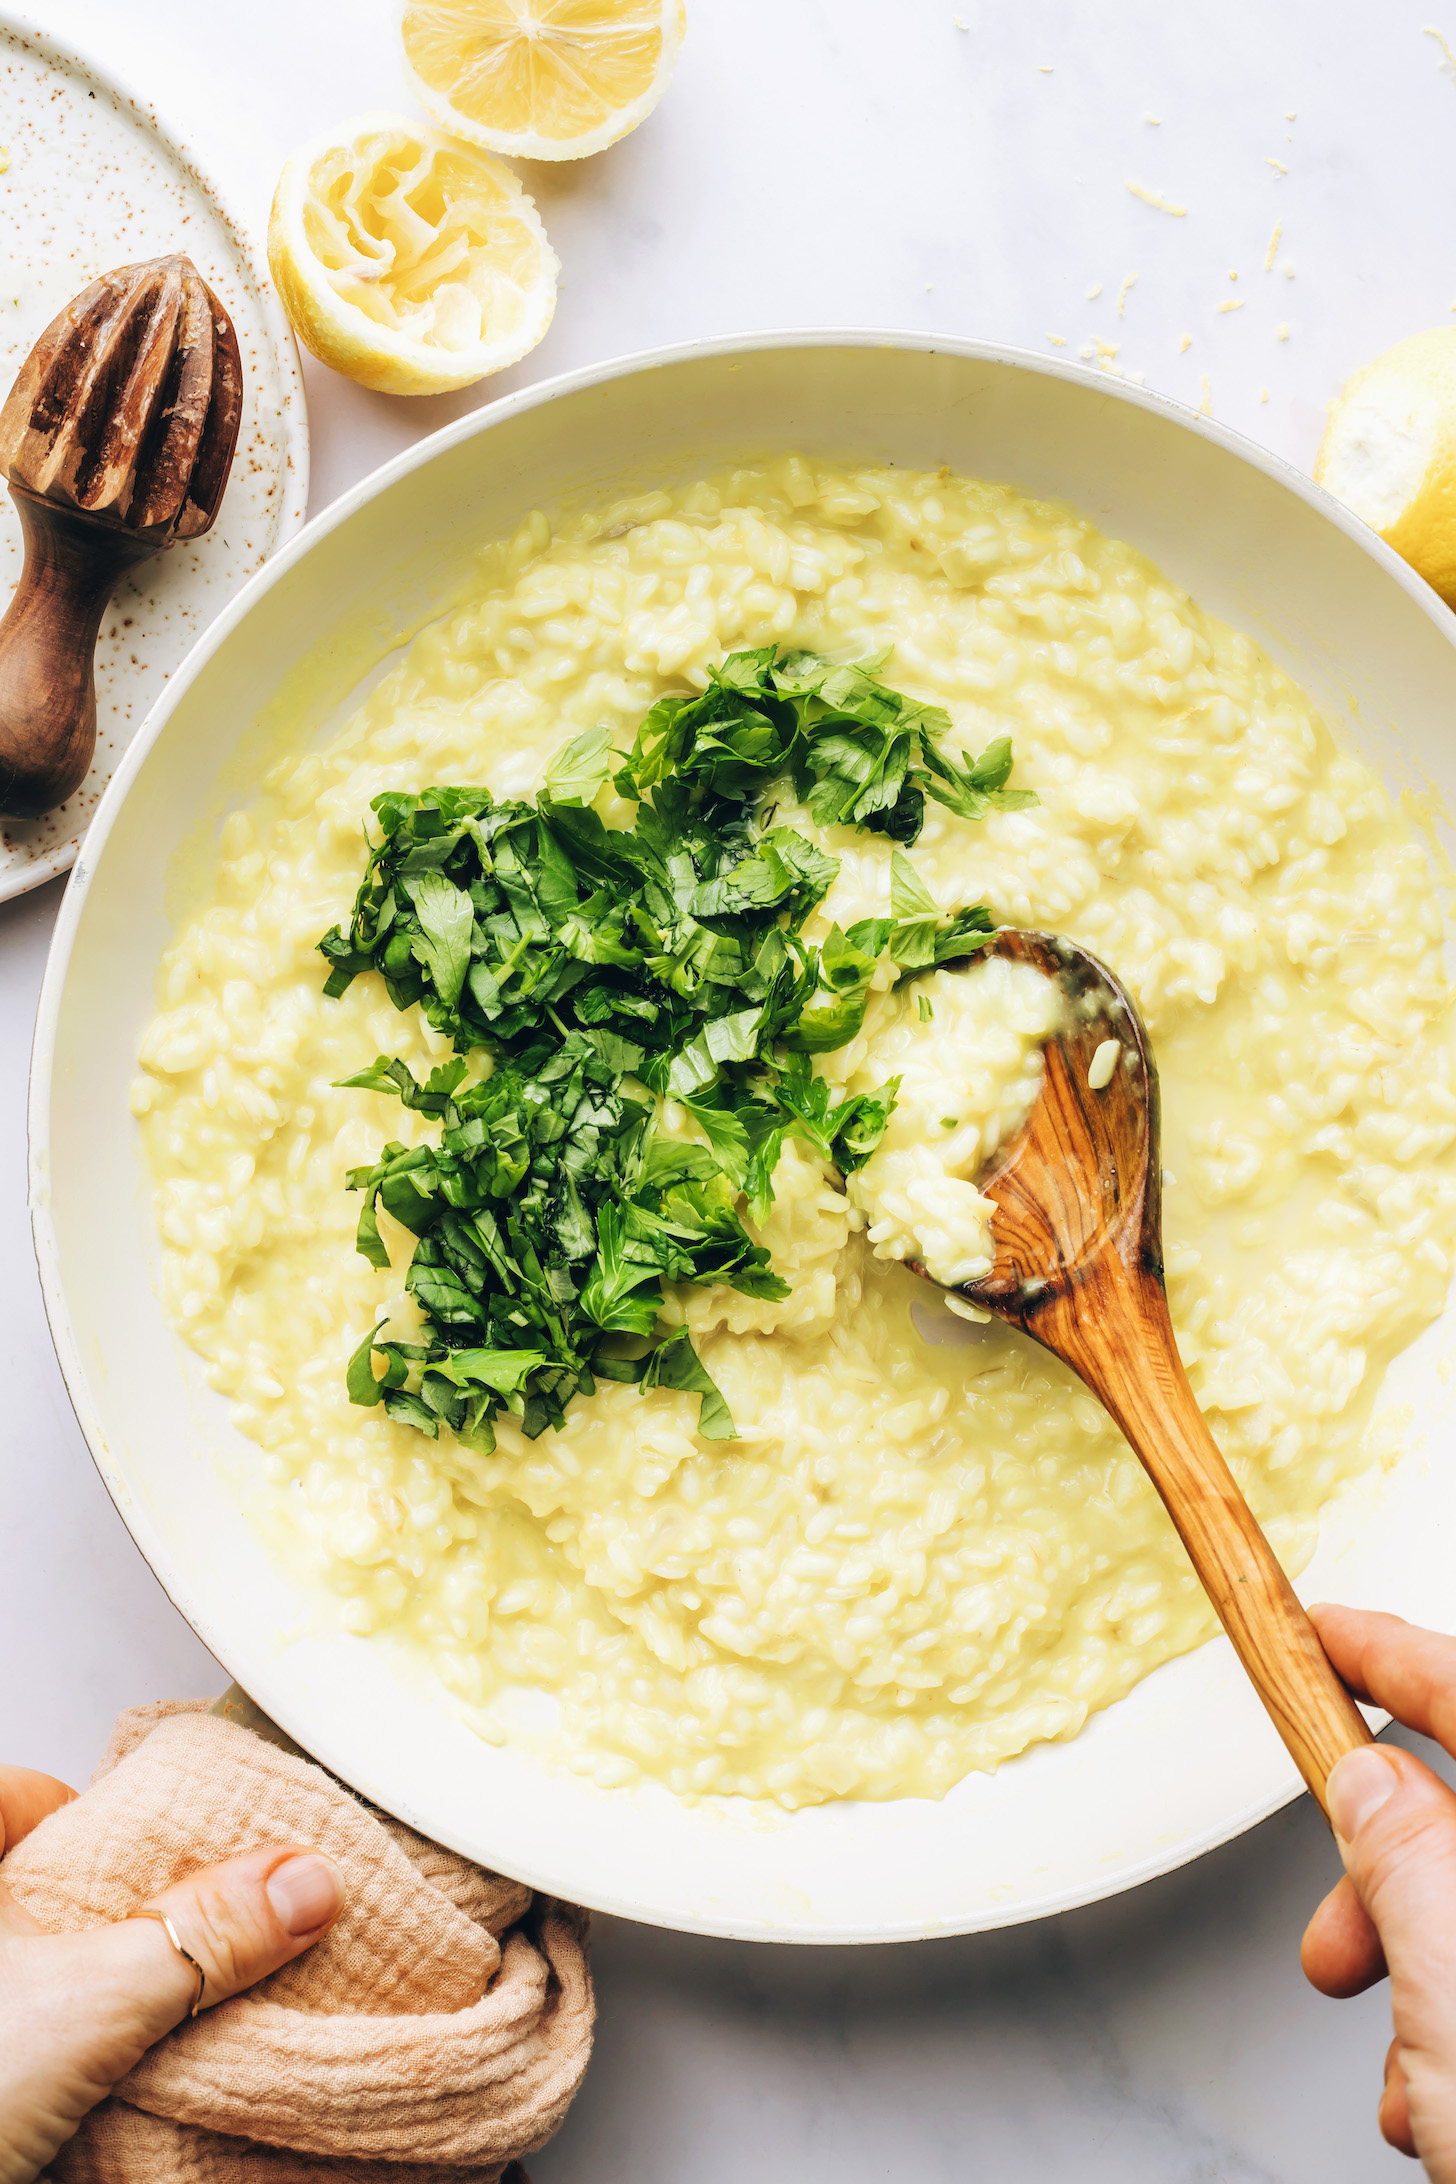 Hands stirring fresh parsley and basil into a creamy lemon risotto